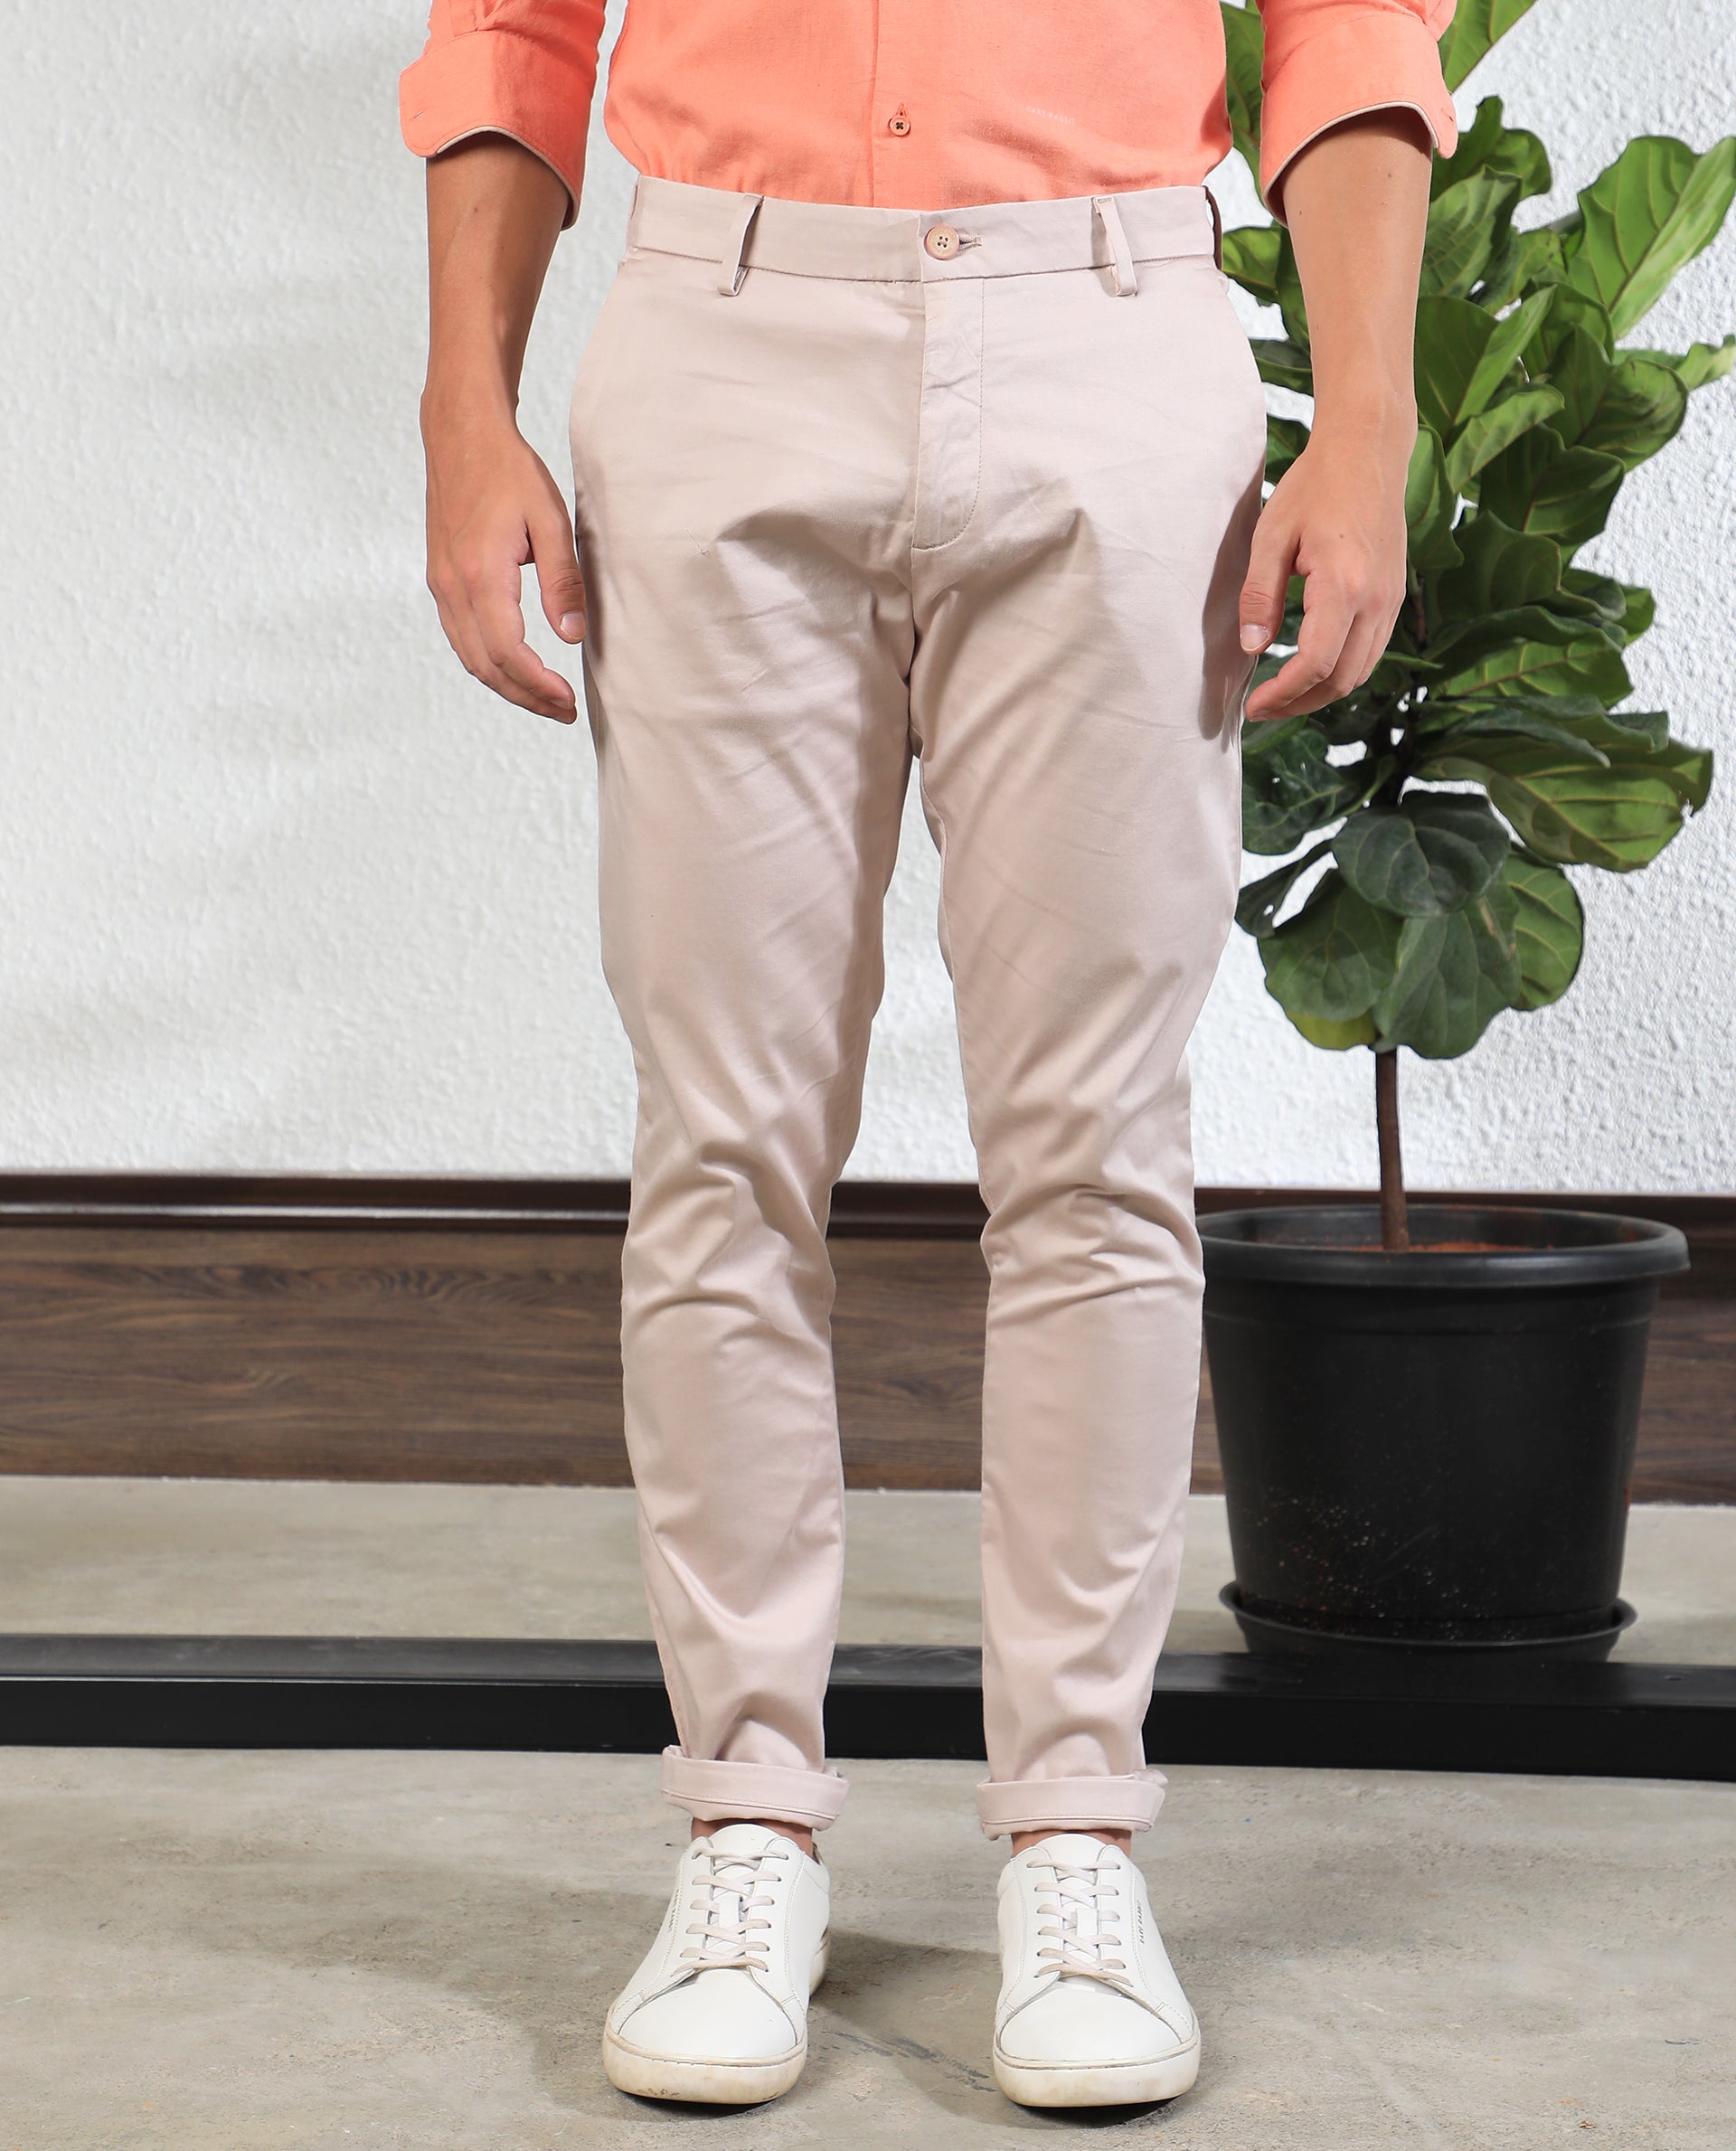 Men's Running Trousers, Long Outdoor Trousers, Relaxed Fit, Hiking Trousers,  Chino Trousers, Casual Trousers, Jogging Bottoms, Work Trousers, Elegant  Sweatpants, Quick Dry Pocket Trous, khaki, S : Amazon.co.uk: Fashion